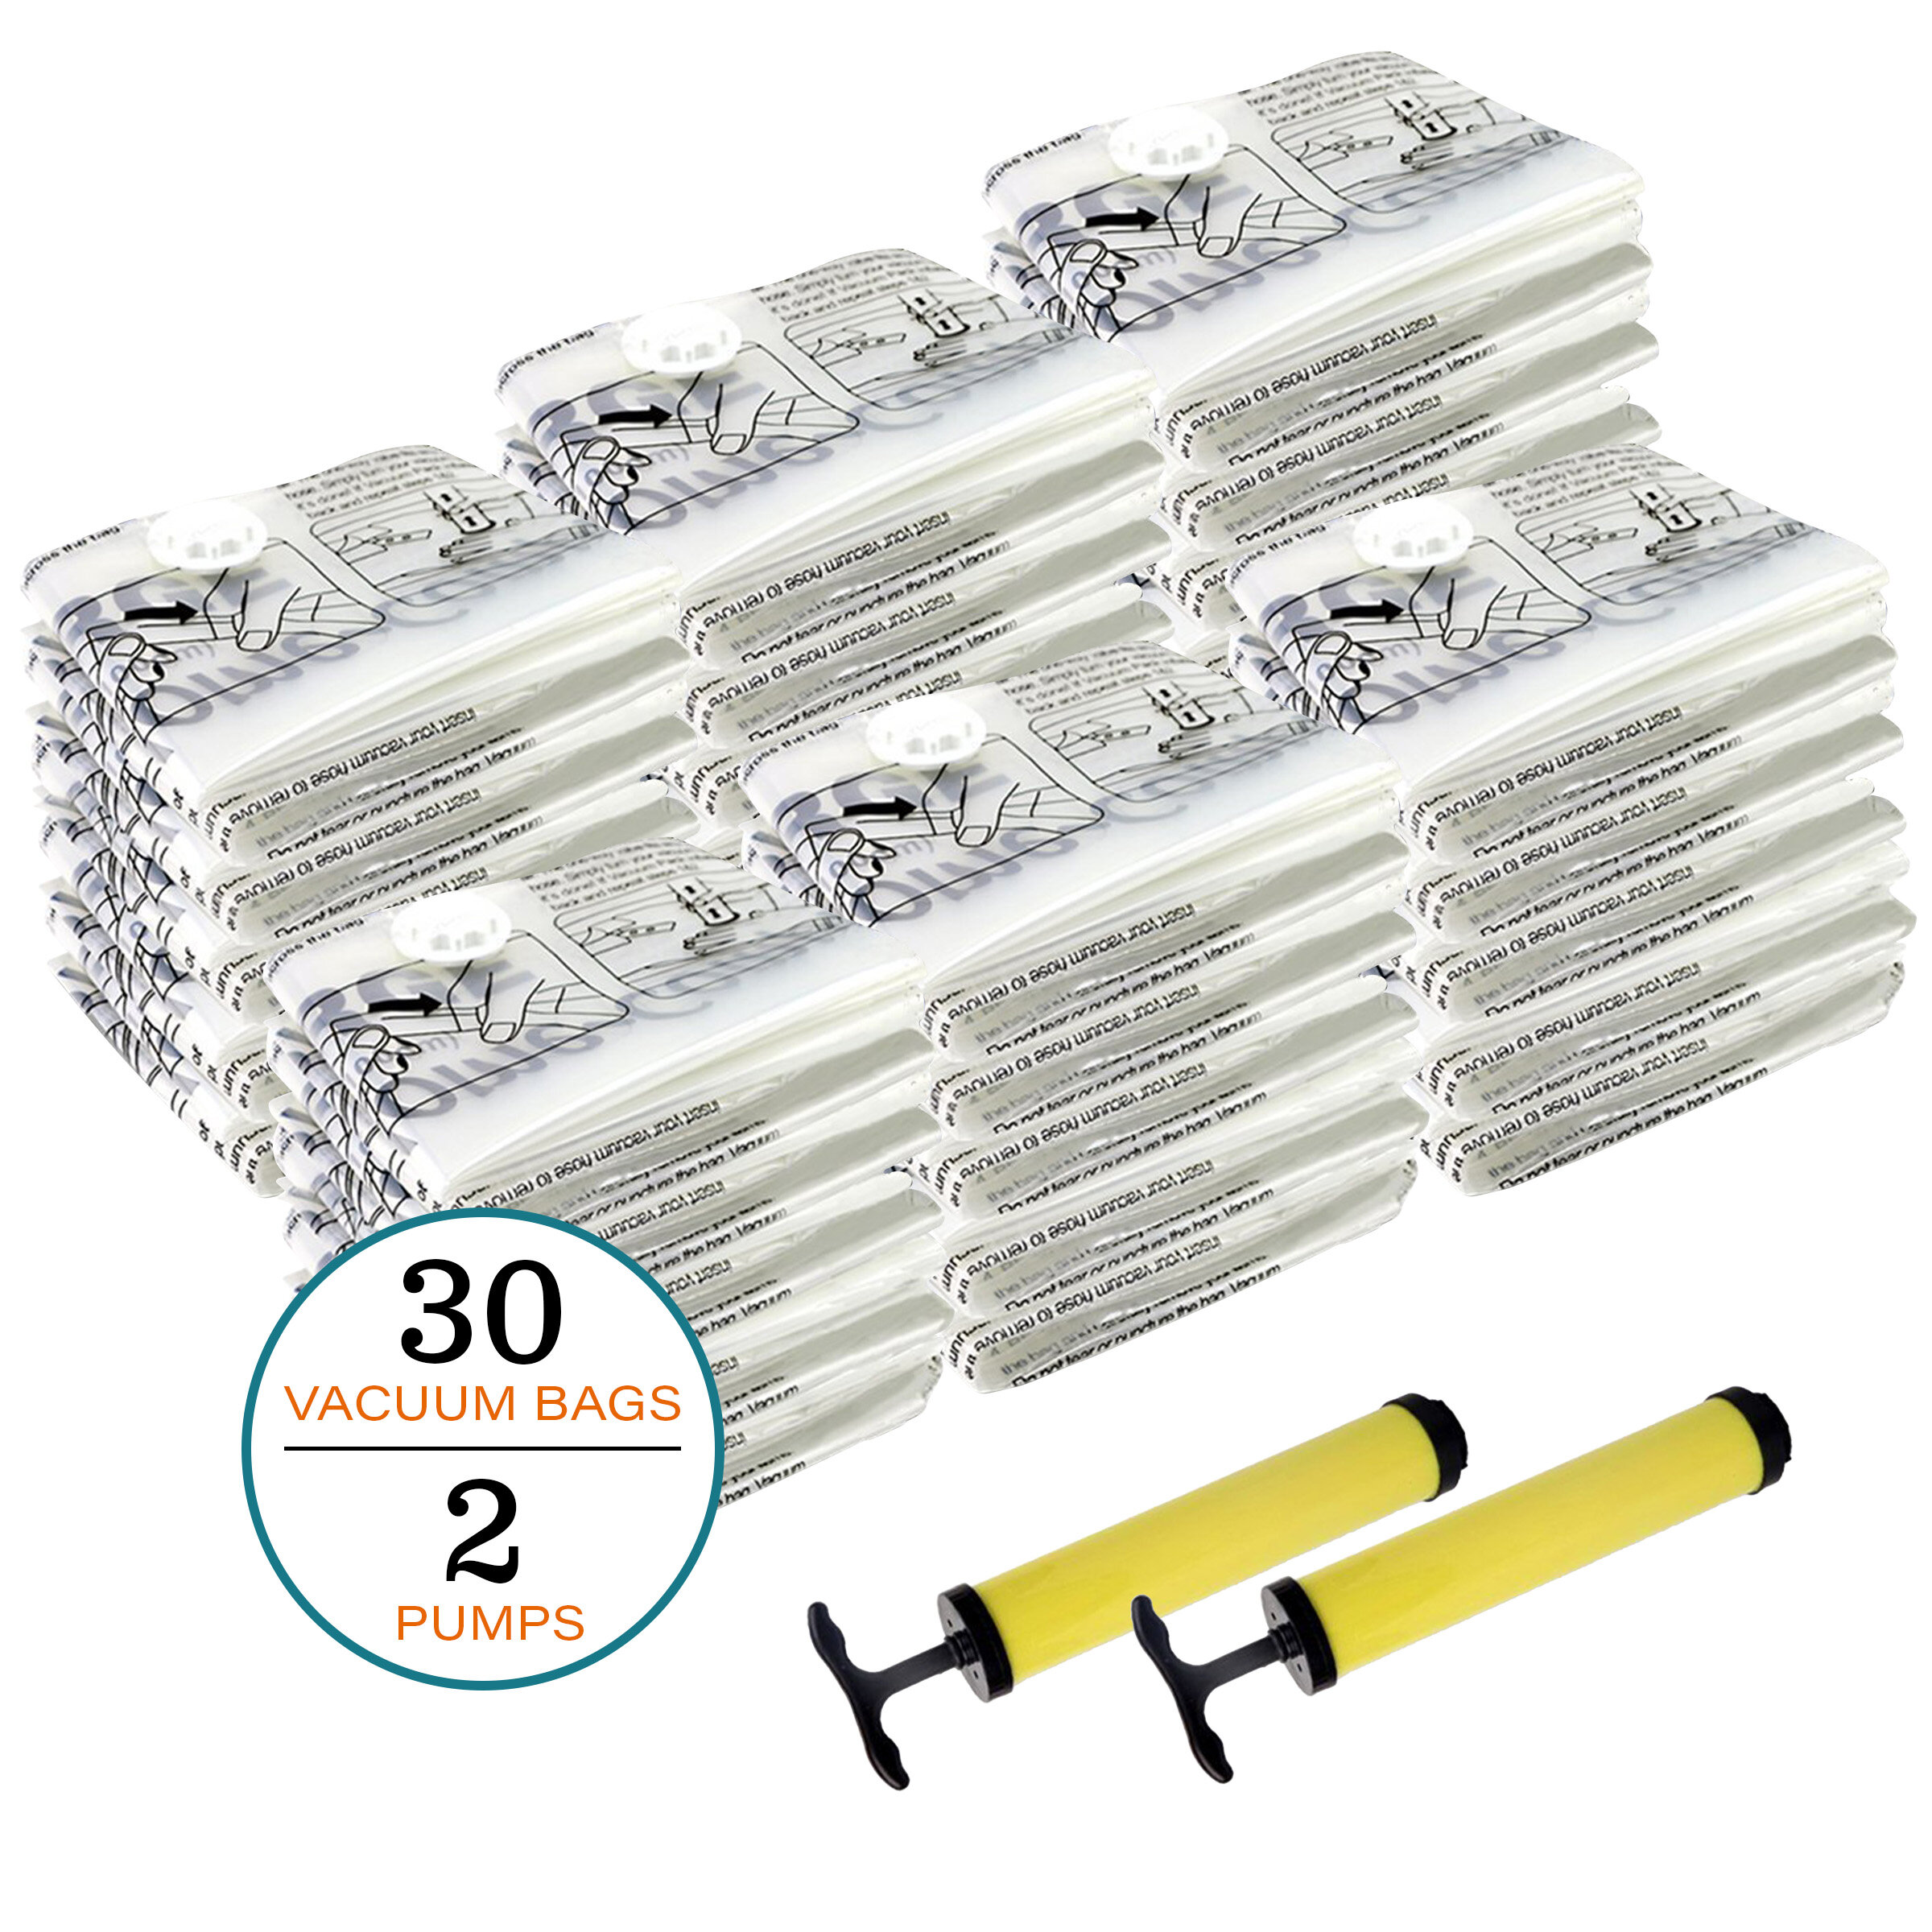 25 Pack Space Saver Bags (5 Jumbo/5 Large/5 Medium/5 Small/5 Roll)  Compression Storage Bags for Comforters and Blankets, Vacuum Sealer Bags  for